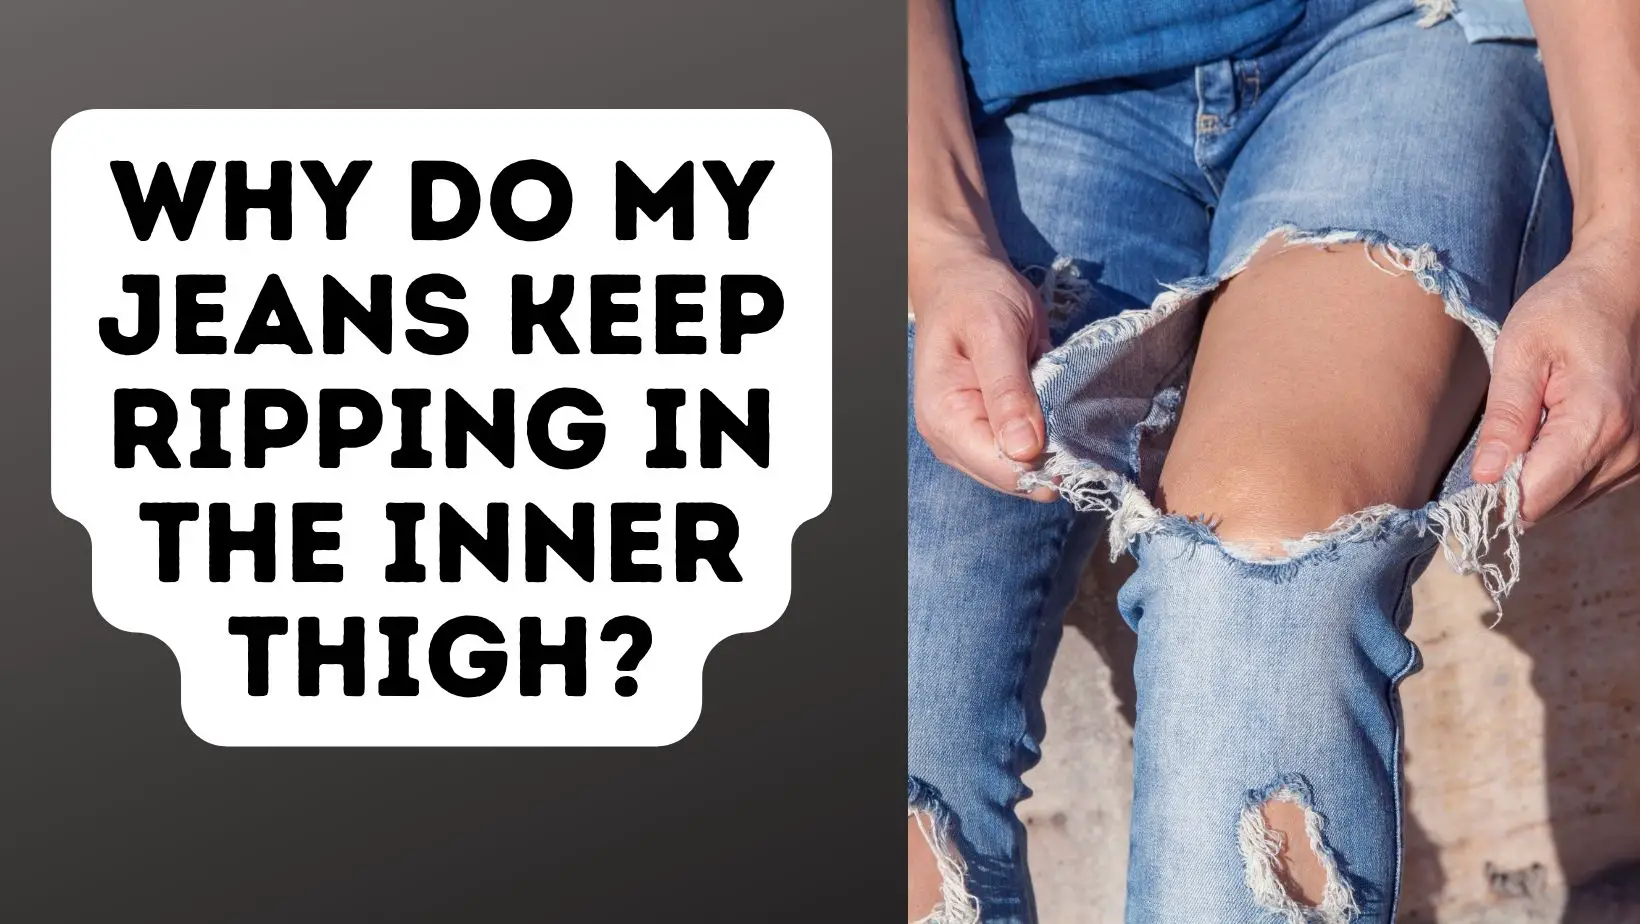 Why Do My Jeans Keep Ripping In The Inner Thigh?